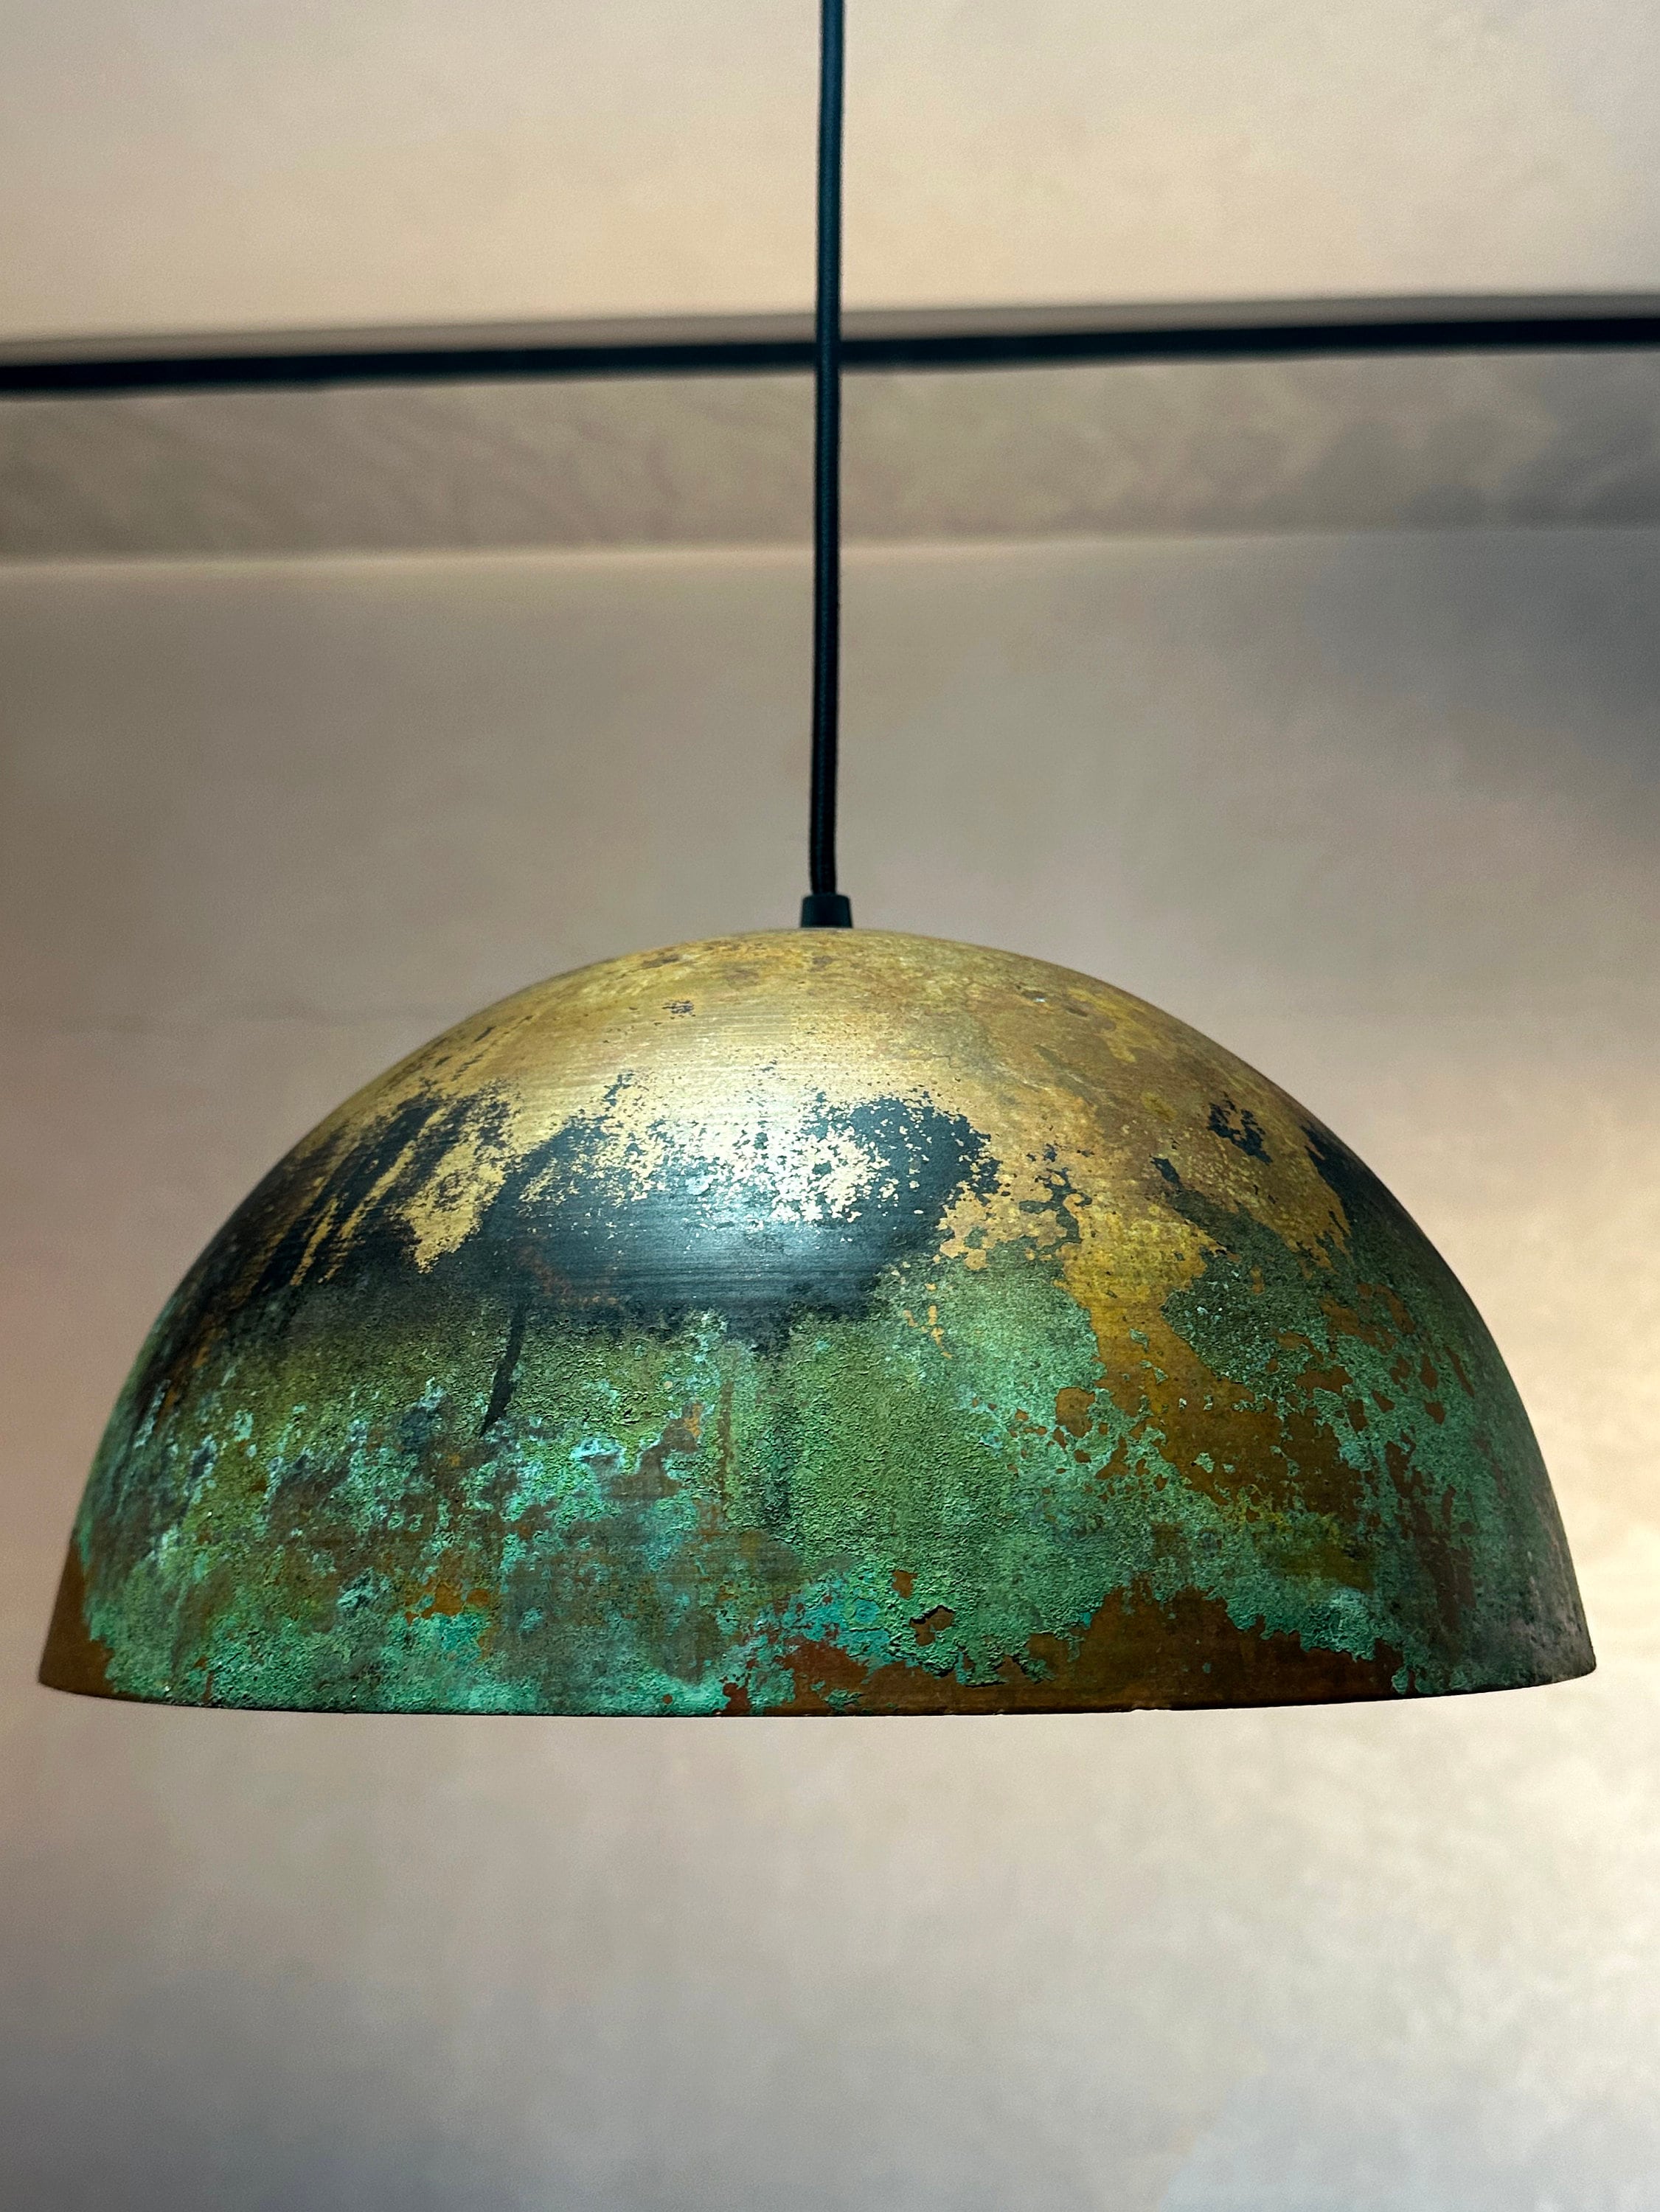 How to Choose the Perfect Copper Pendant Light for Your Home: Home Light Guide